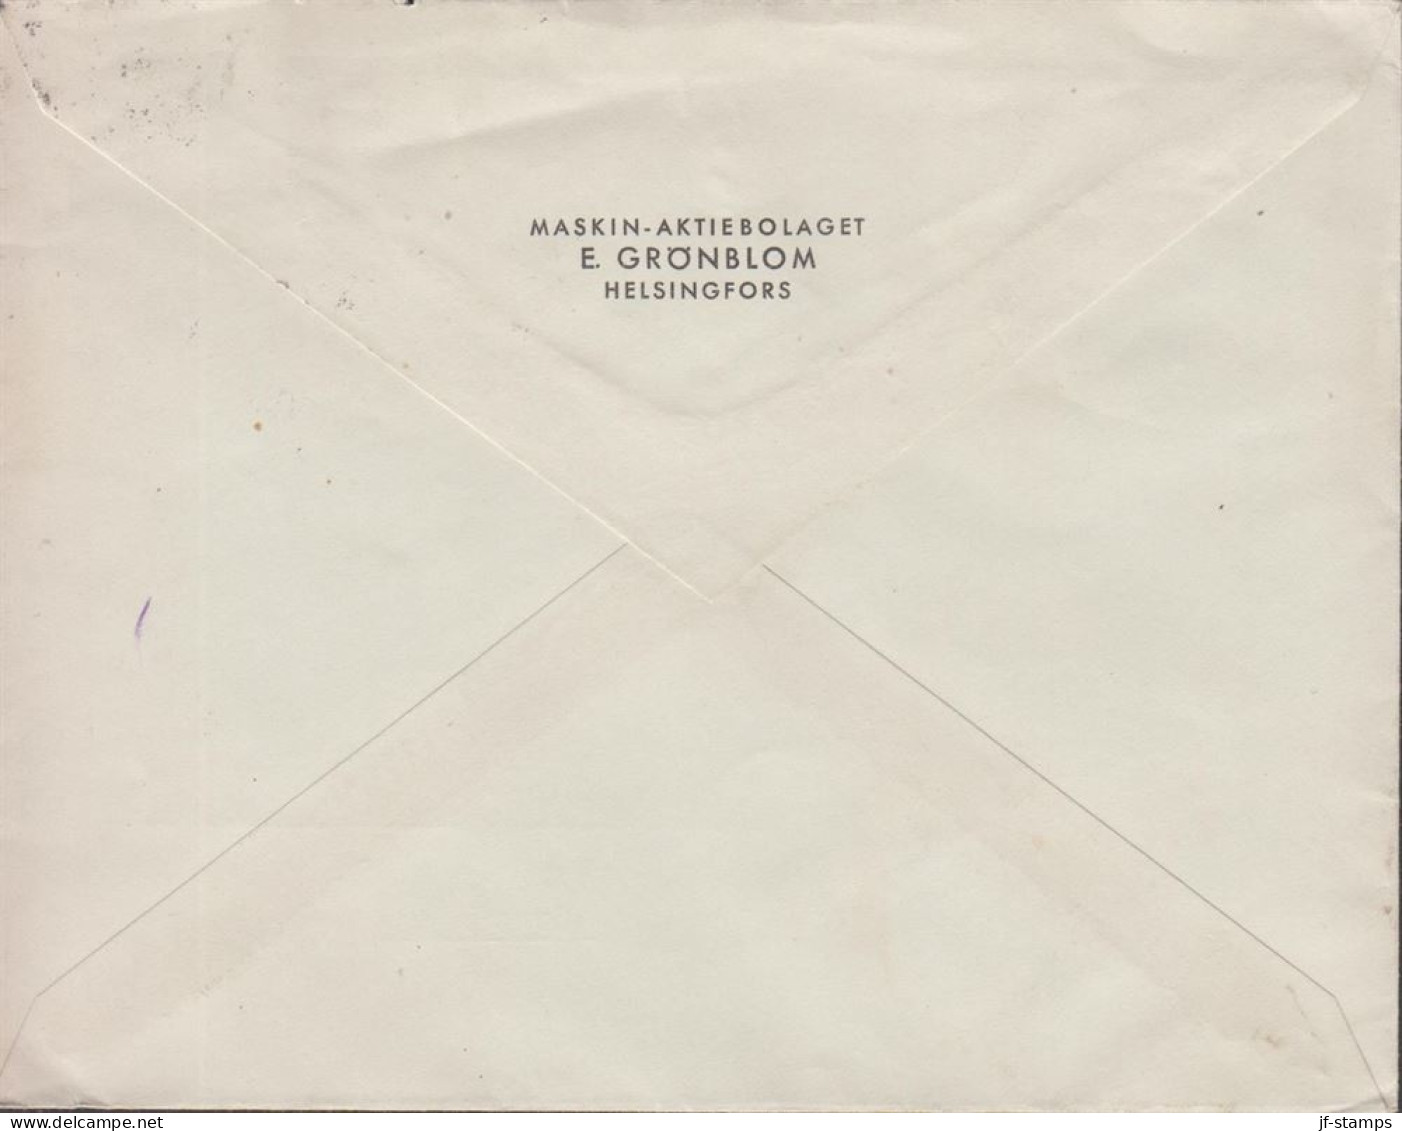 1940. FINLAND. Very Early Censored Cover To Storebro Sverige Par Avion Cancelled With Private Machine Canc... - JF542801 - Brieven En Documenten